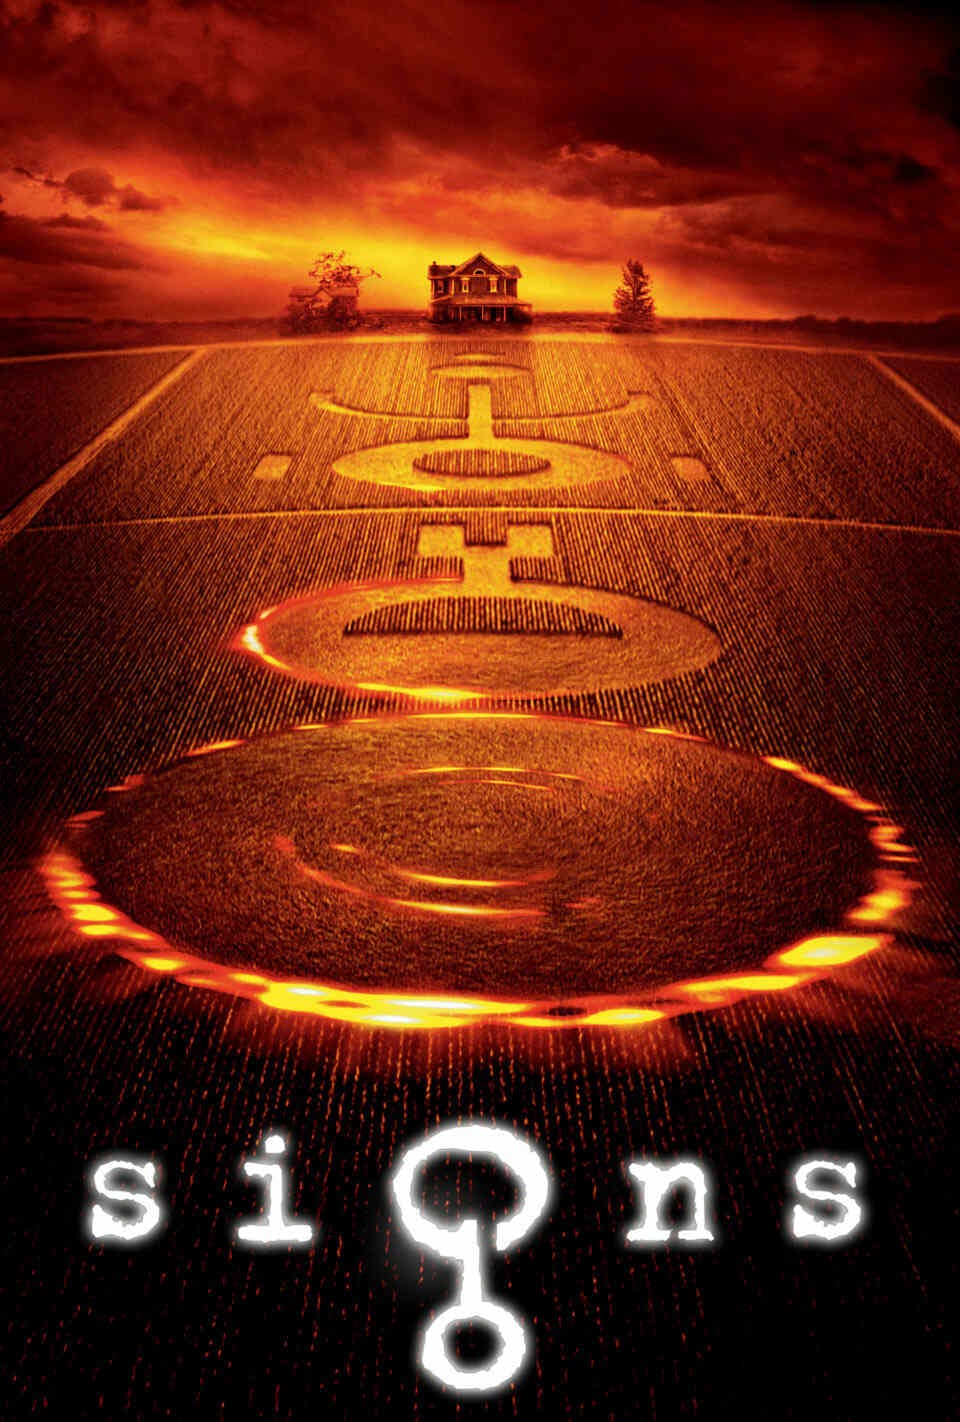 Read Signs screenplay (poster)